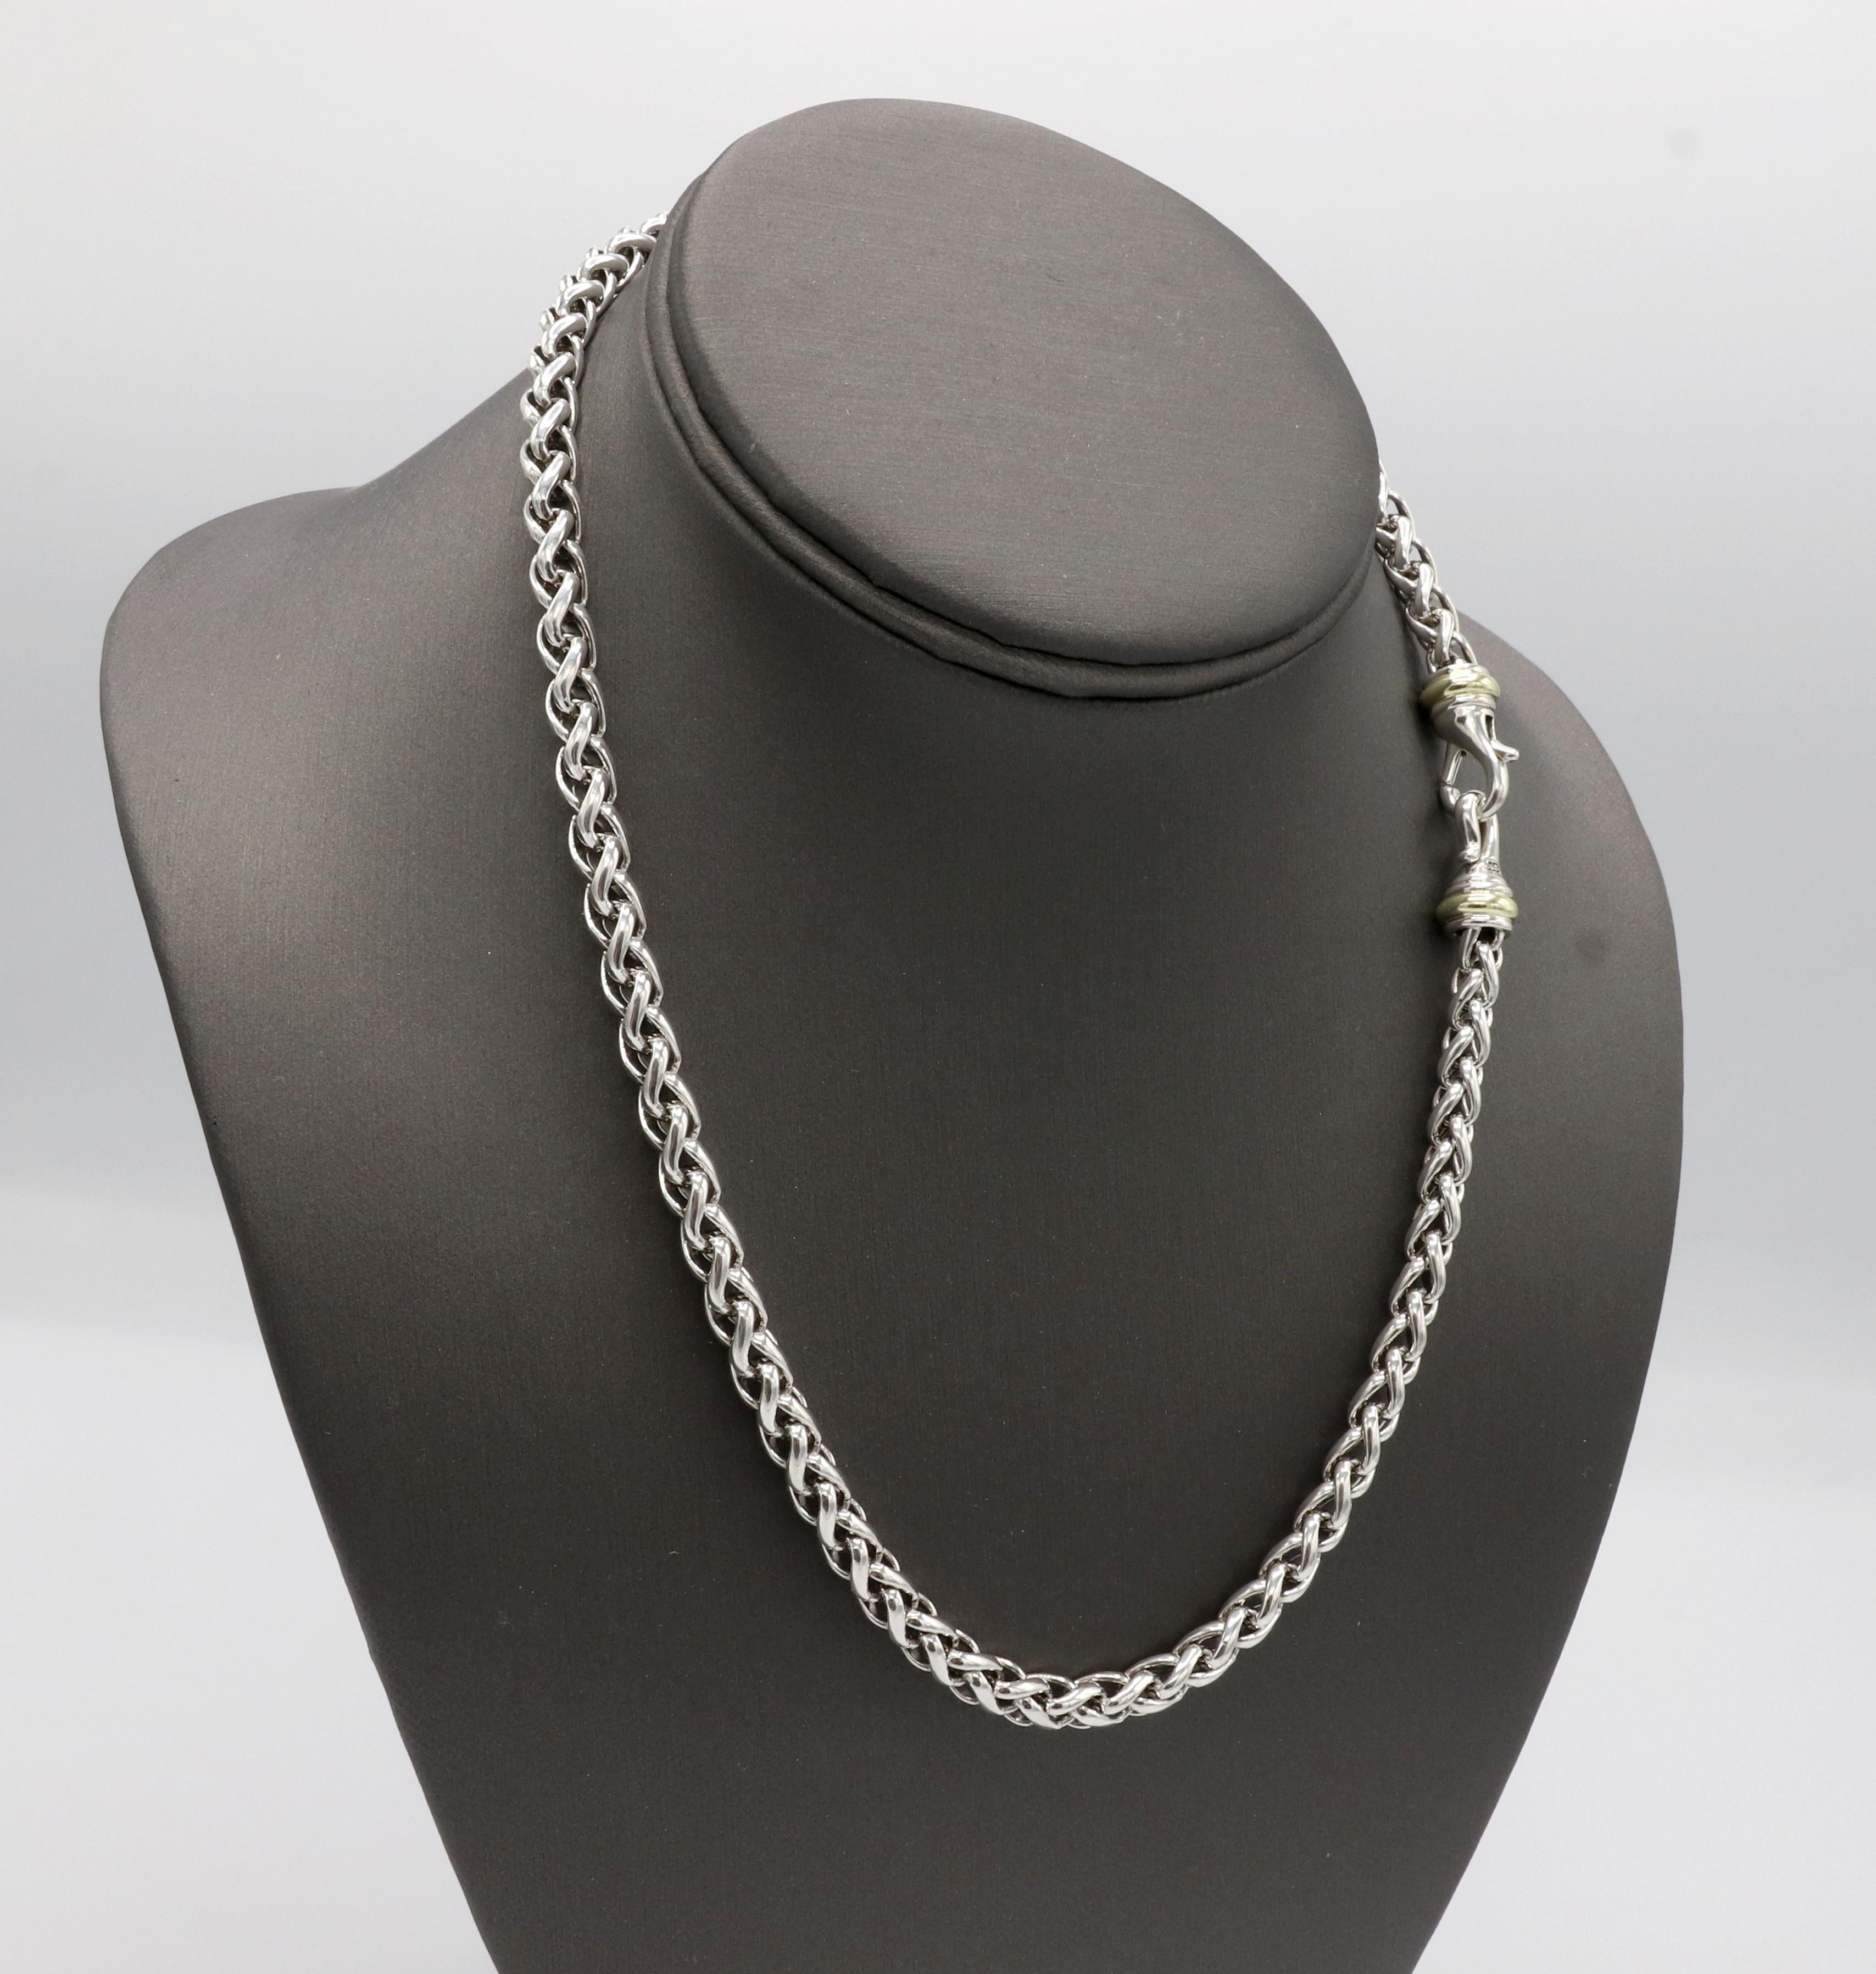 David Yurman Sterling Silver & 14 Karat Yellow Gold Wheat Chain Necklace 5MM
Metal: Sterling silver & 14k yellow gold
Weight: 51.3 grams
Width: 5mm
Length: 17 inches
